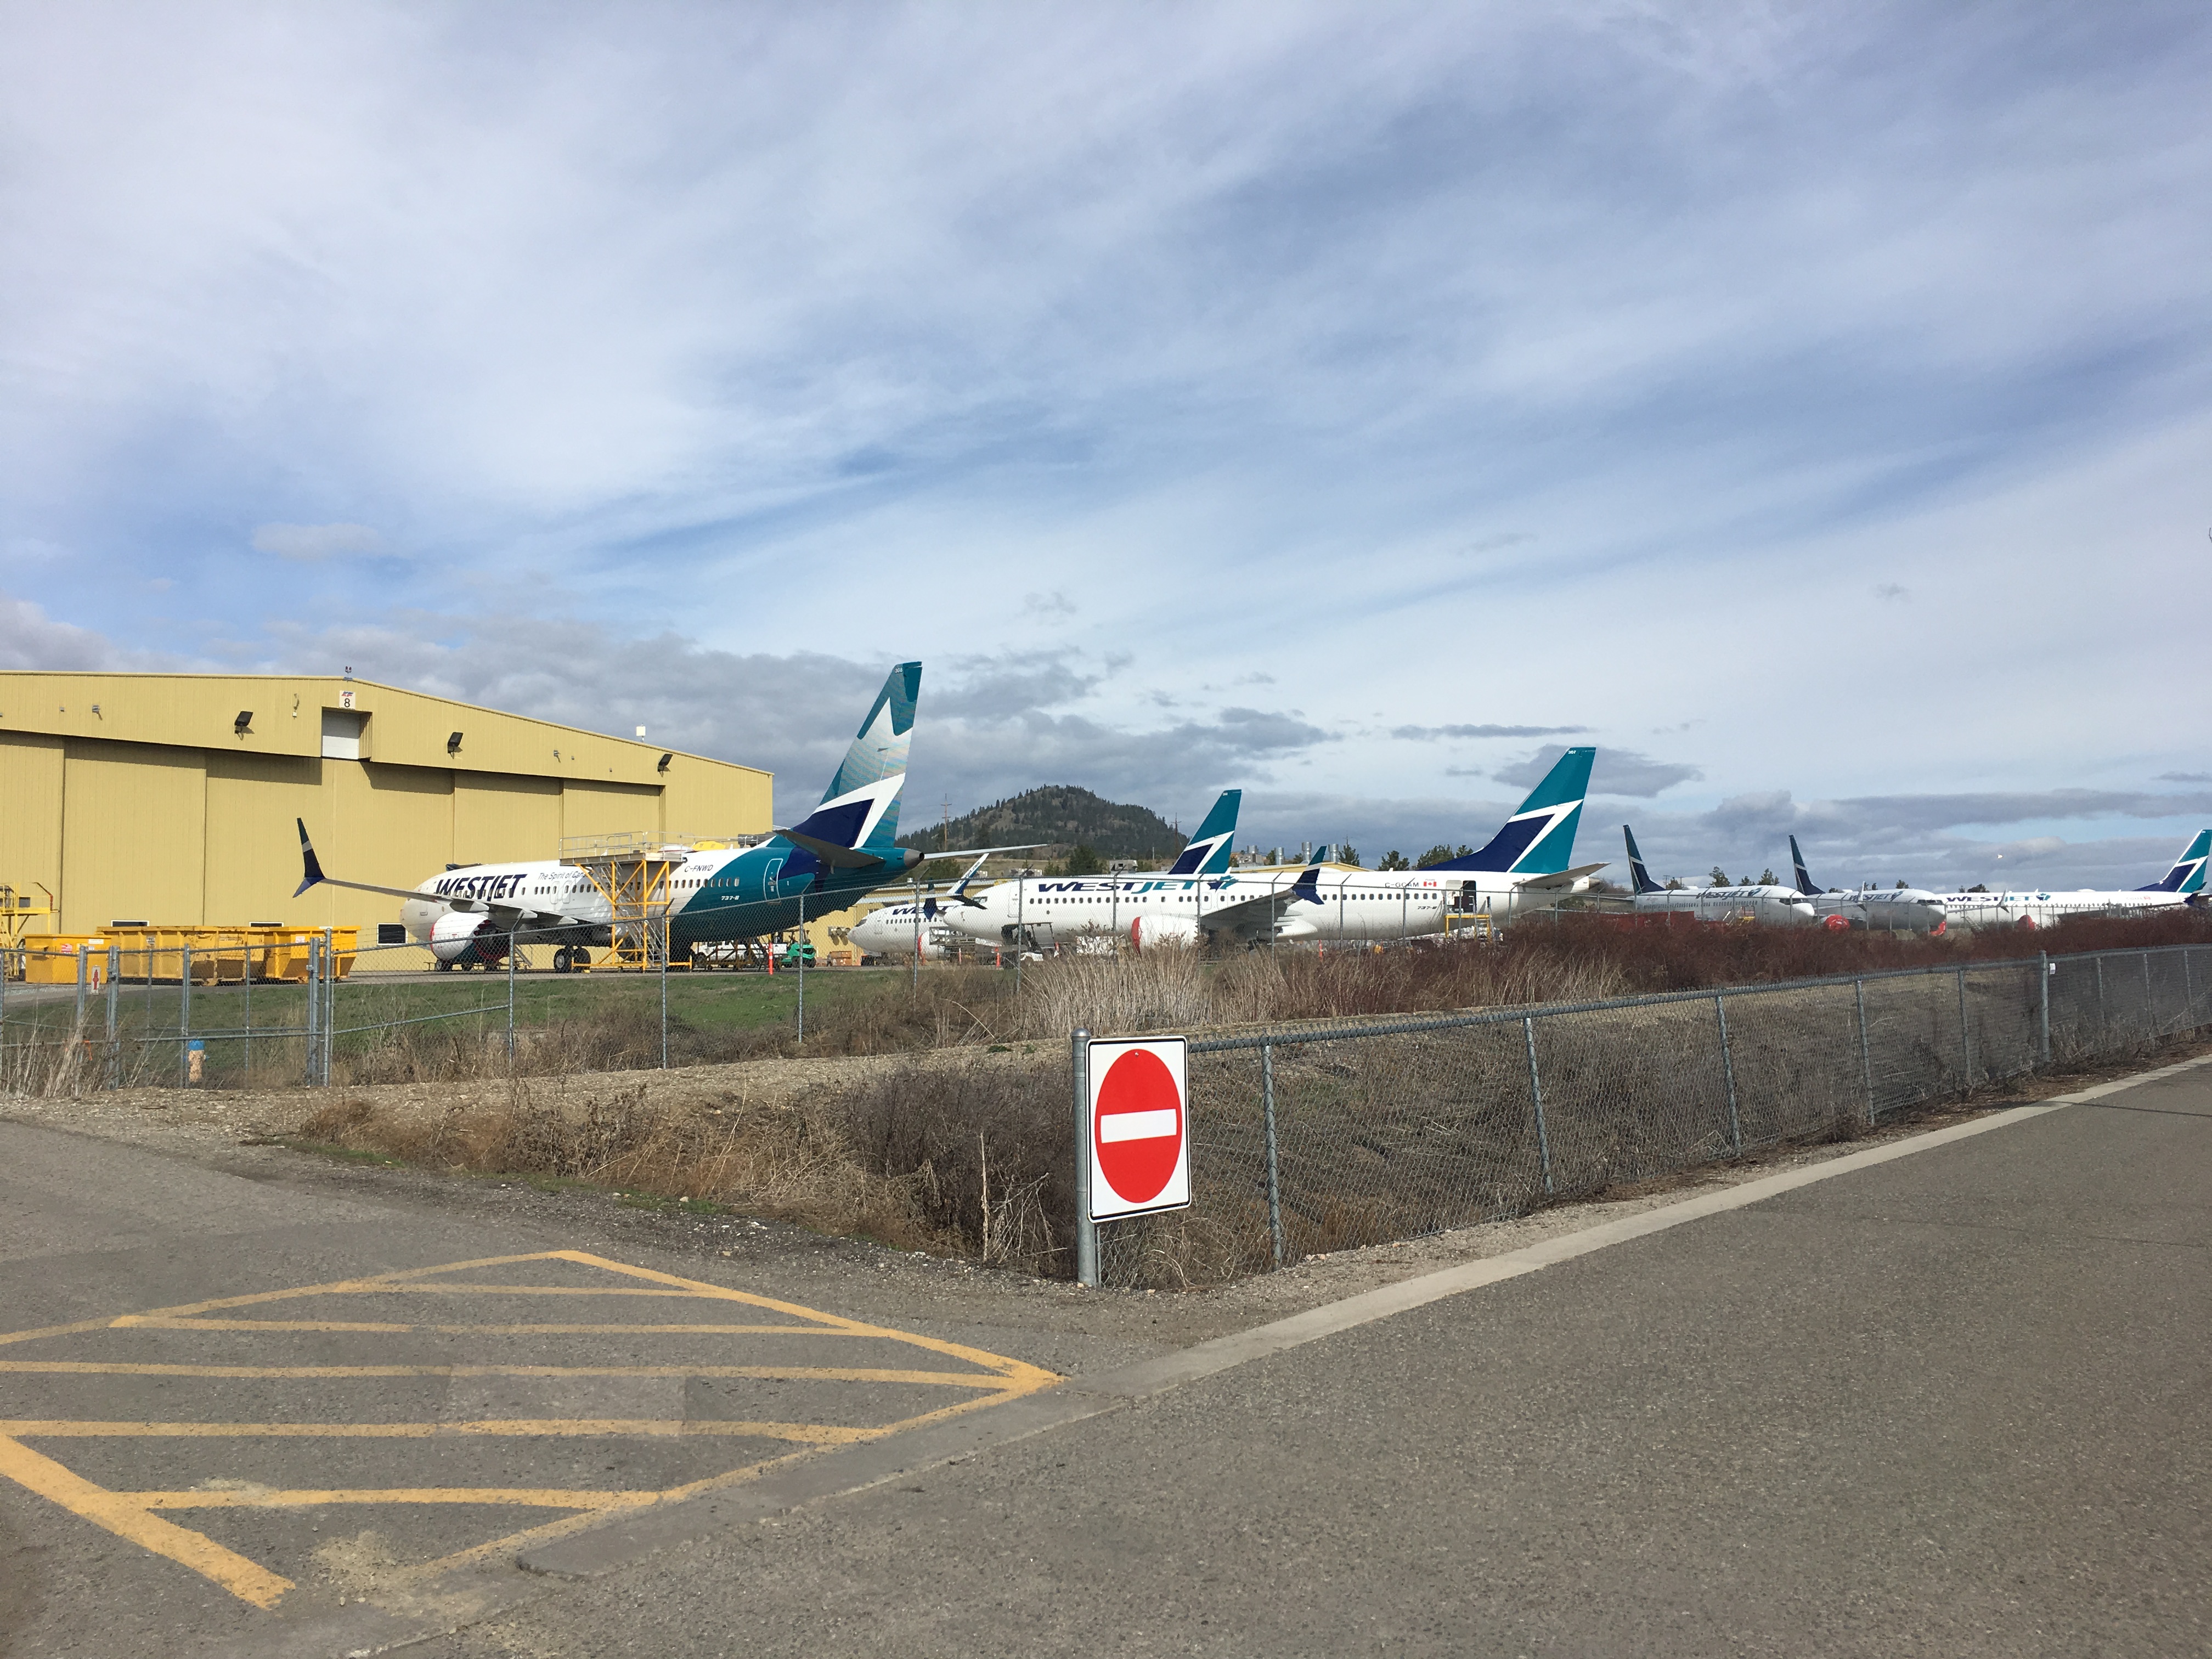 KF Aerospace expecting more job growth through Canadian investment